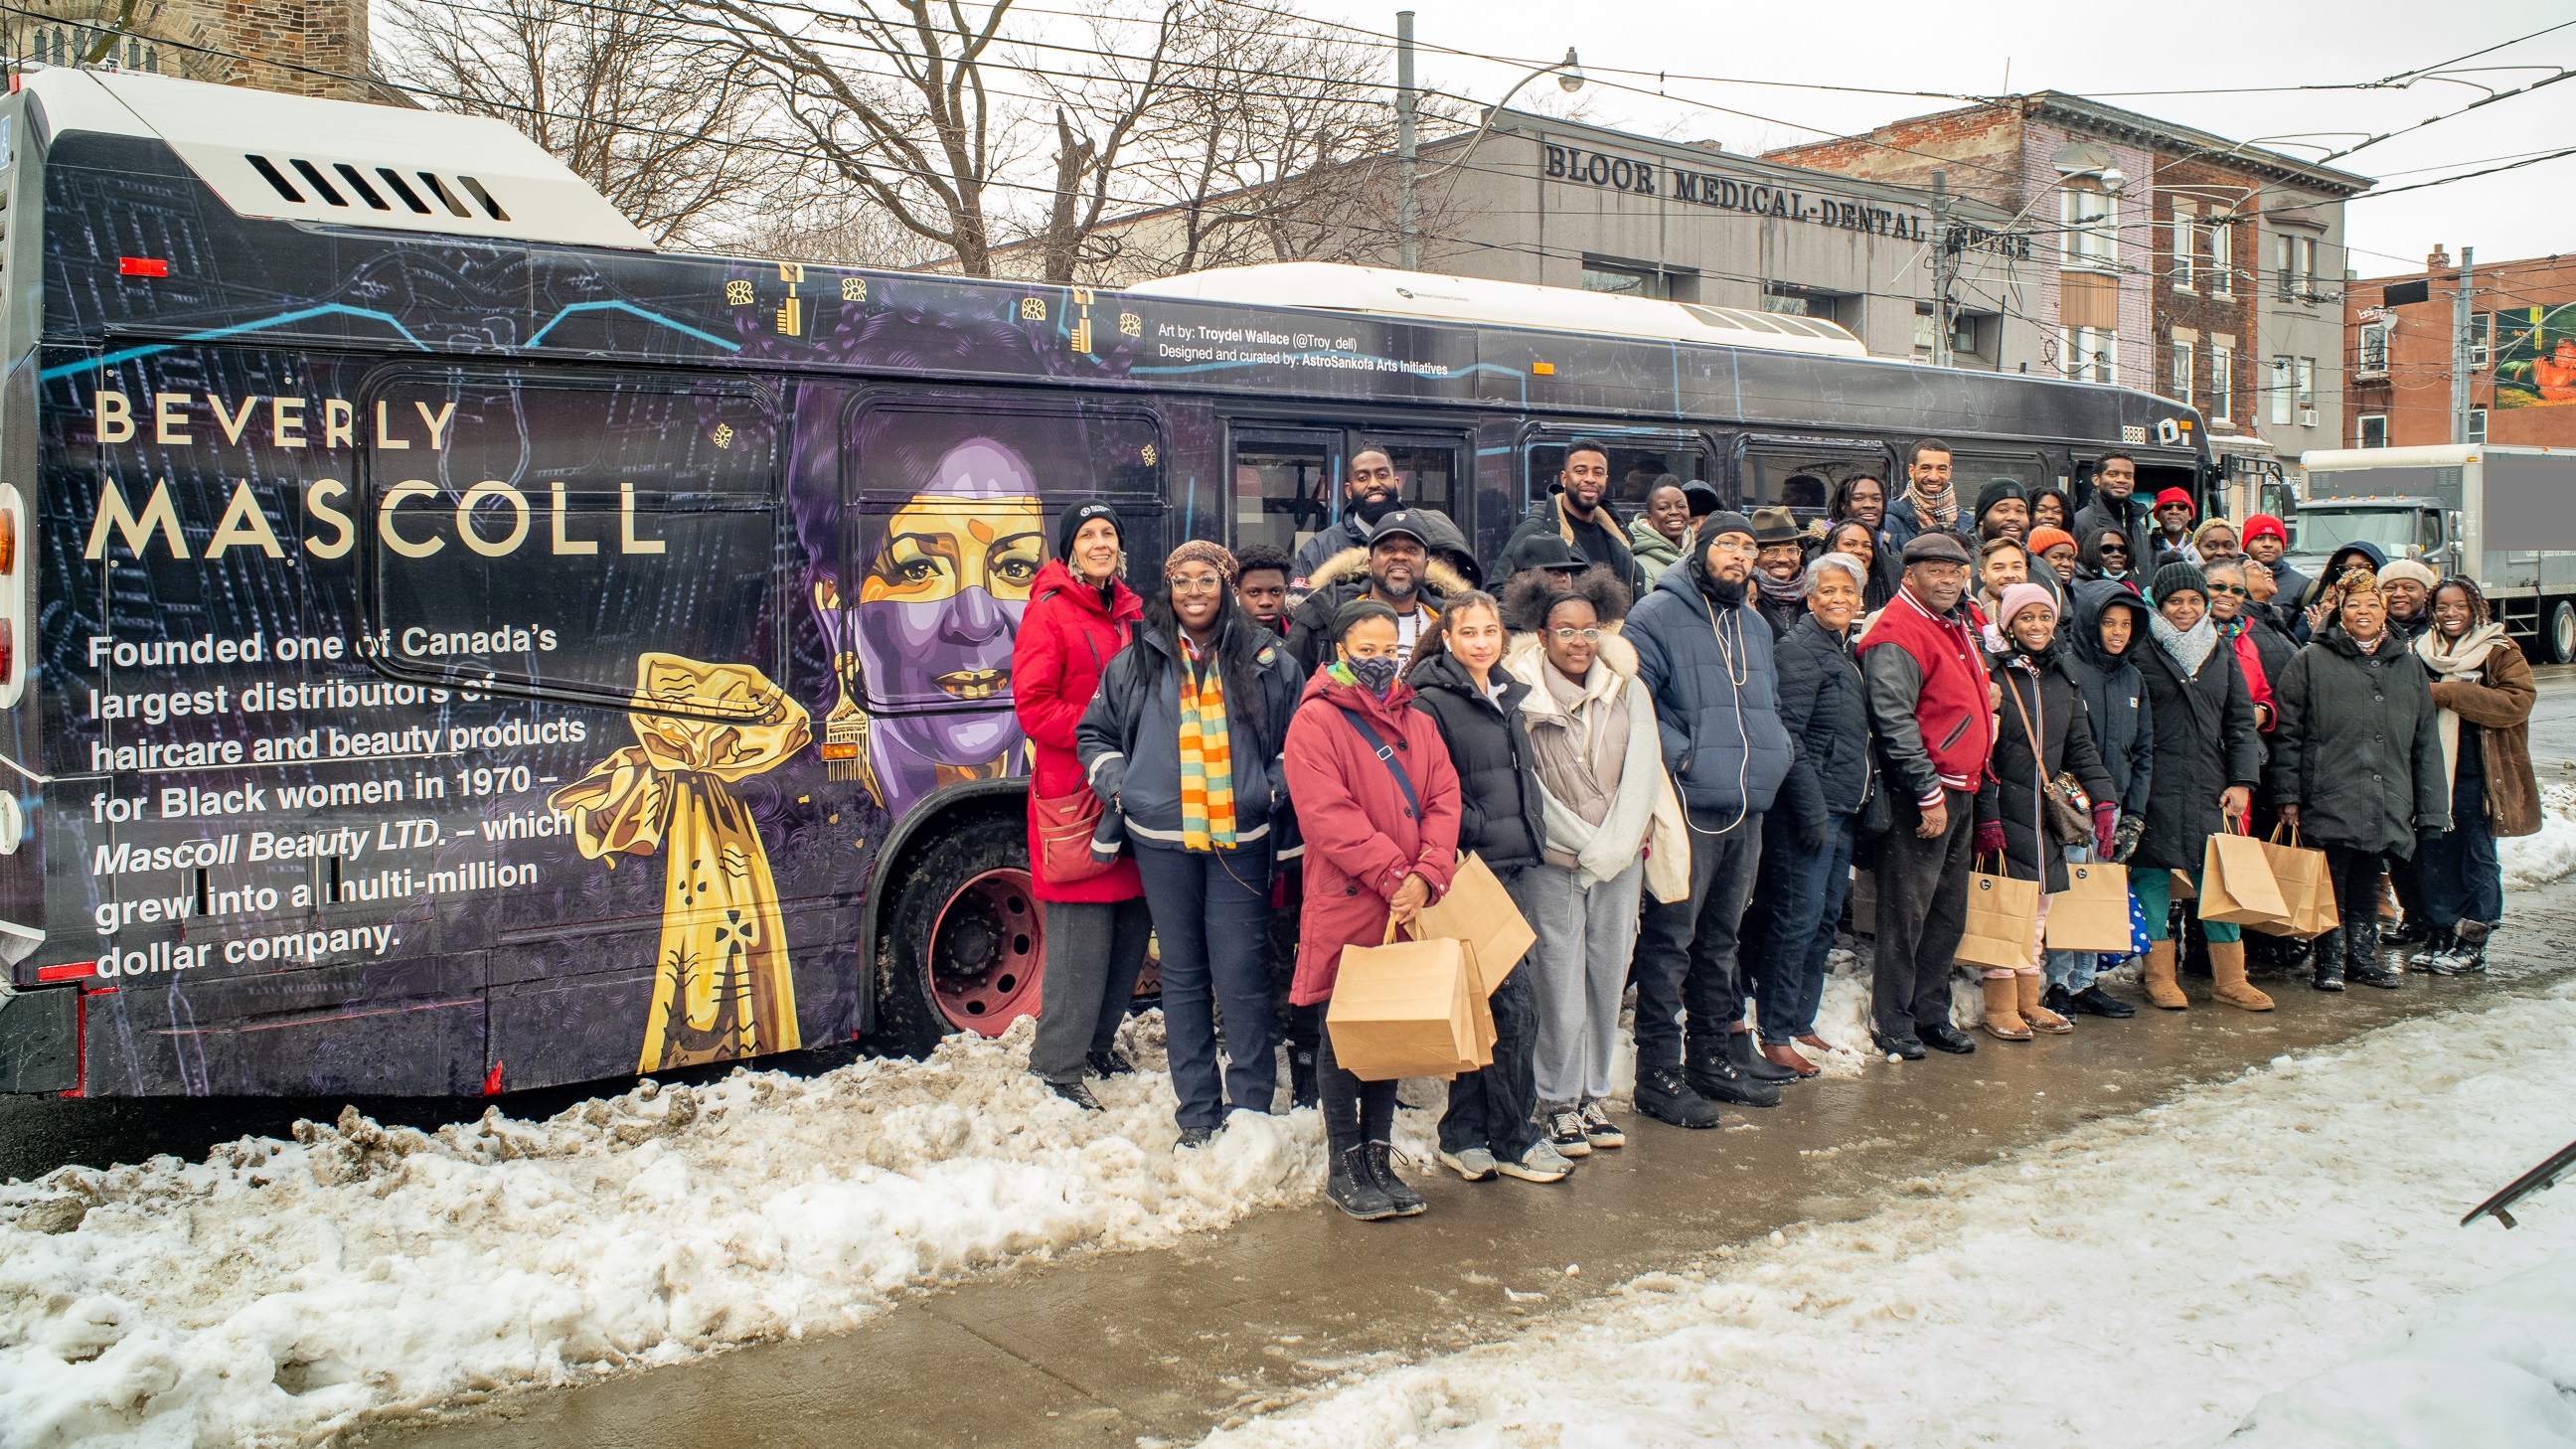 People lined on sidewalk in front of wrapped bus